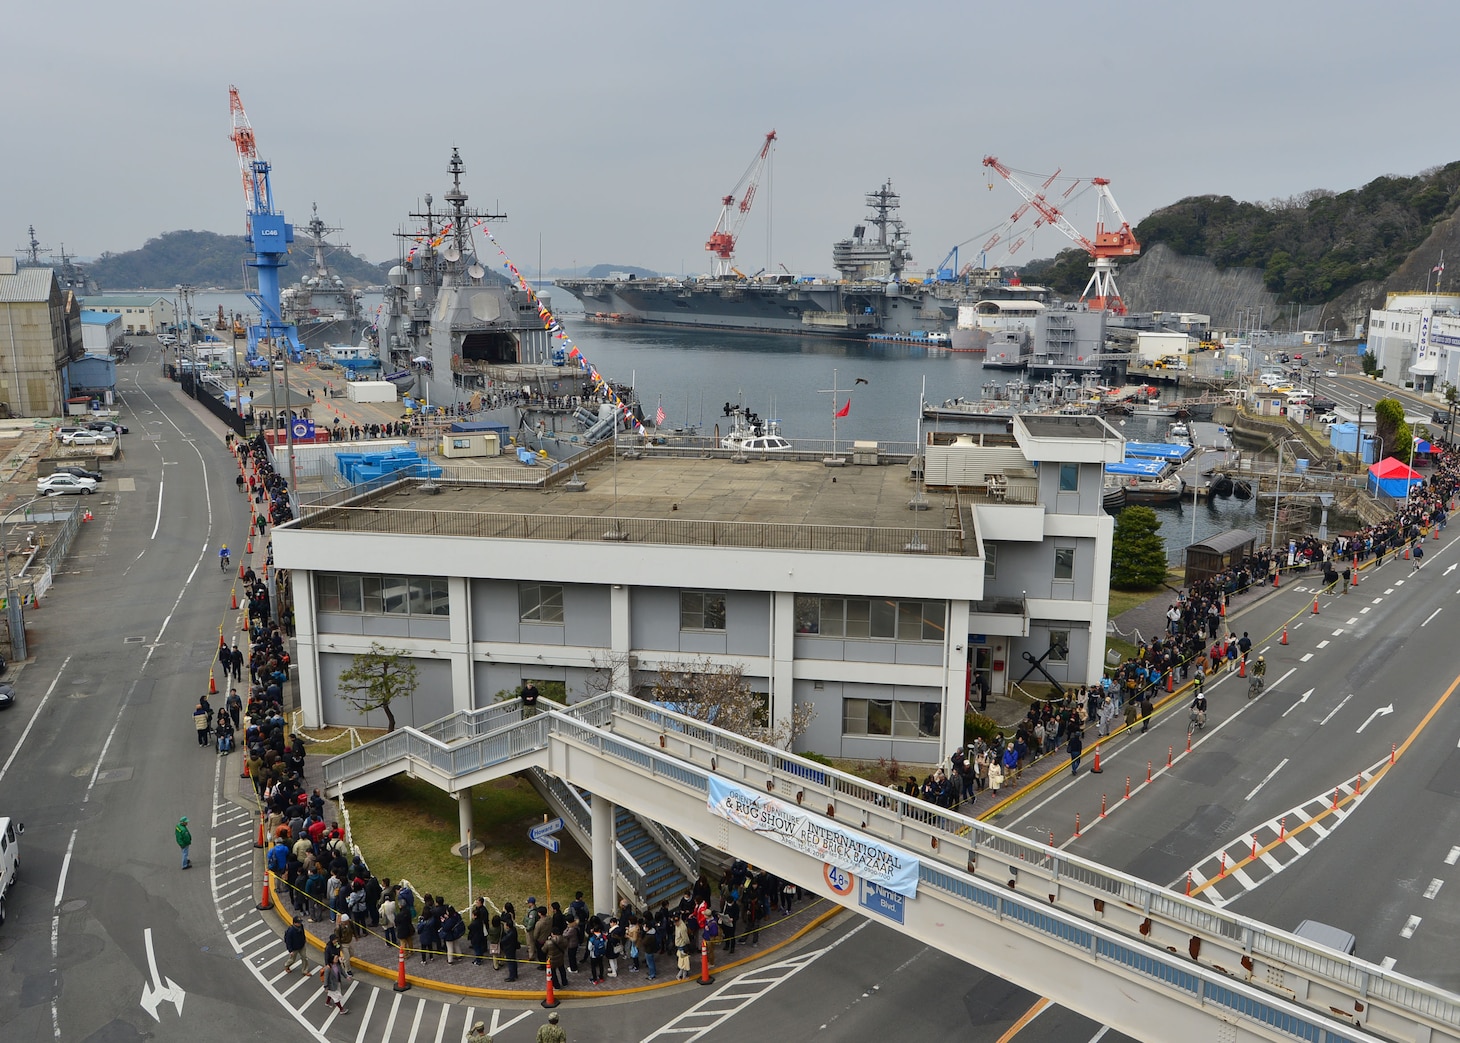 YOKOSUKA, Japan (March 30, 2019) – Visitors wait in line for a tour of the USS Chancellorsville (CG 62) during the 26th annual Spring Festival onboard Fleet Activities (FLEACT) Yokosuka. Fleet Activities Yokosuka provides, maintains, and operates base facilities and services in support of 7th Fleet's forward-deployed naval forces, 71 tenant commands, and more than 27,000 military and civilian personnel.